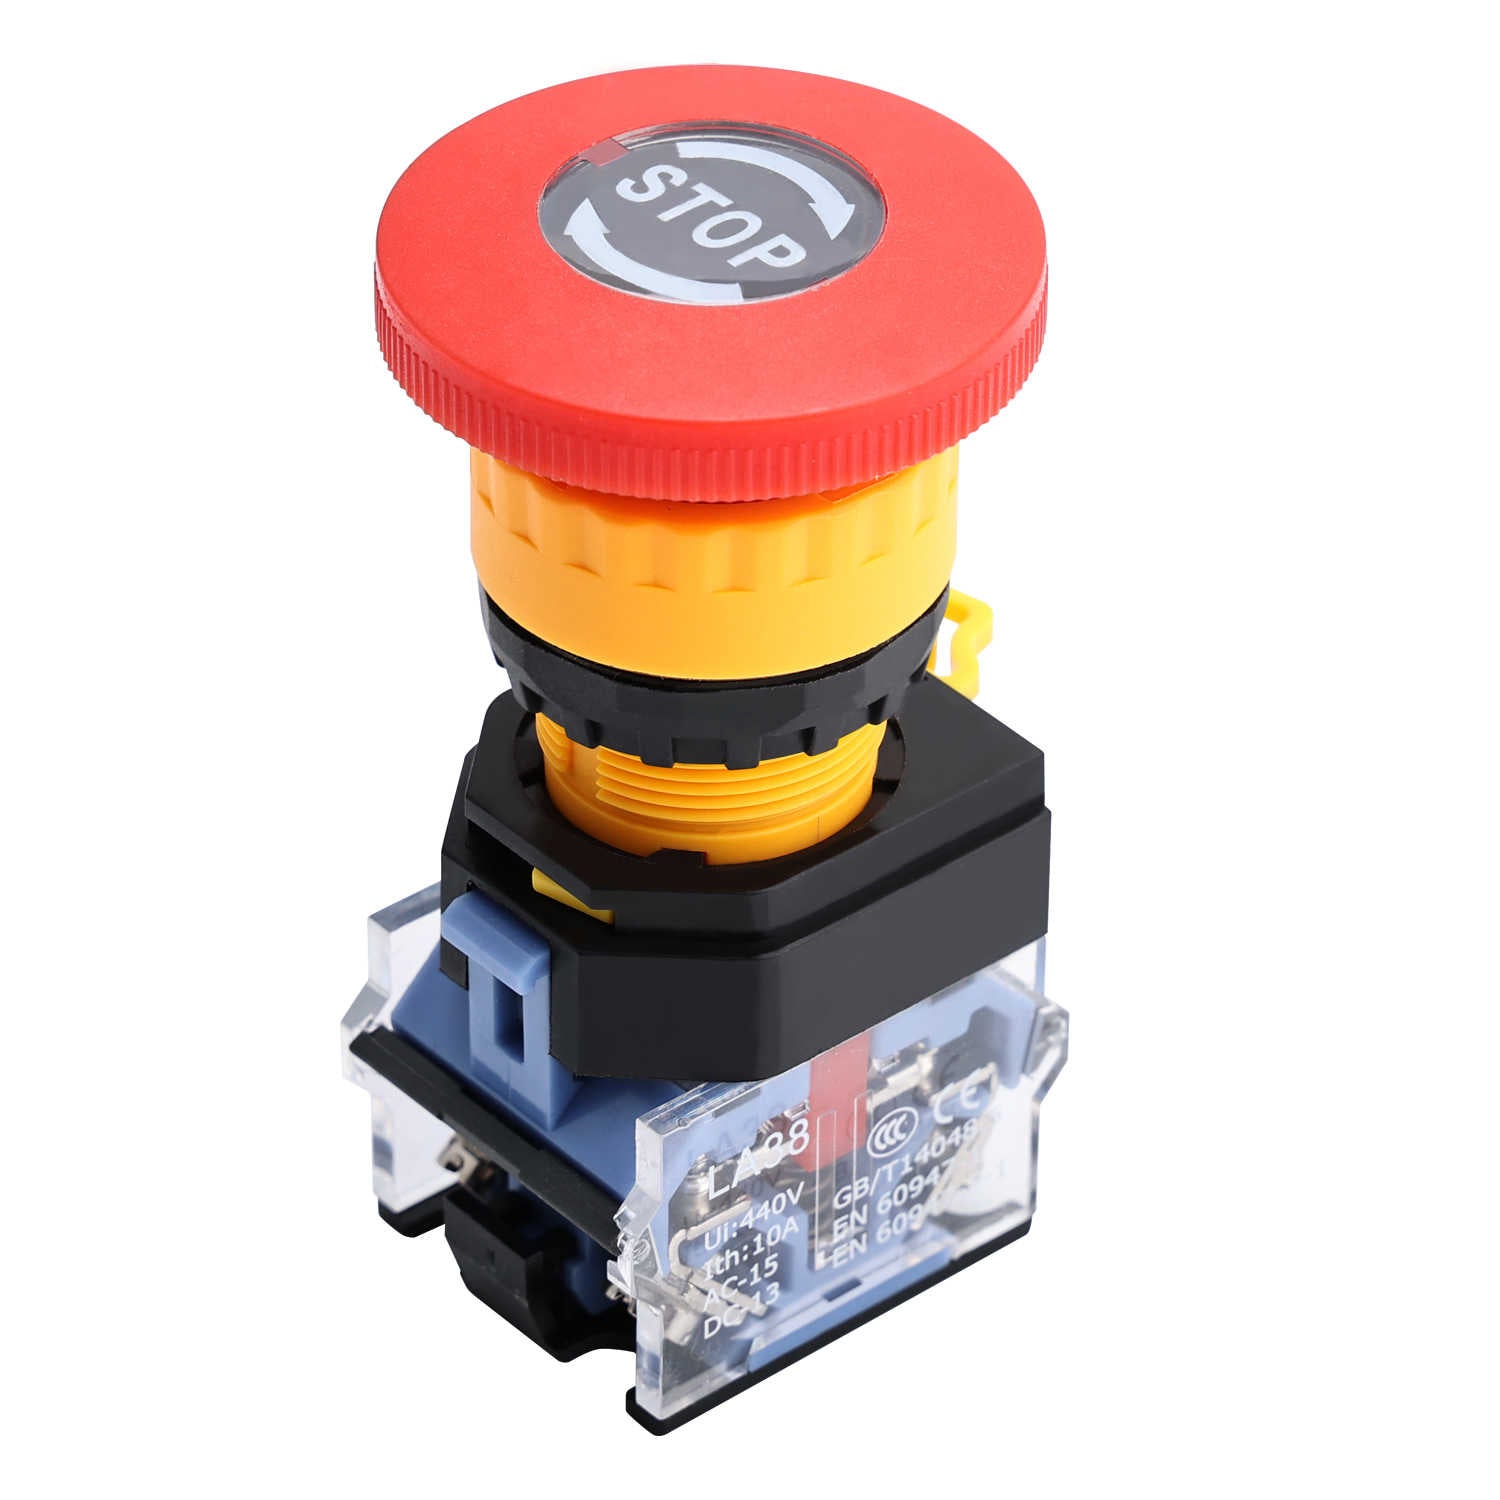 22mm 2NC Red Stop Singal 600V 10 Amp Mushroom Emergency Stop Push Button Switch